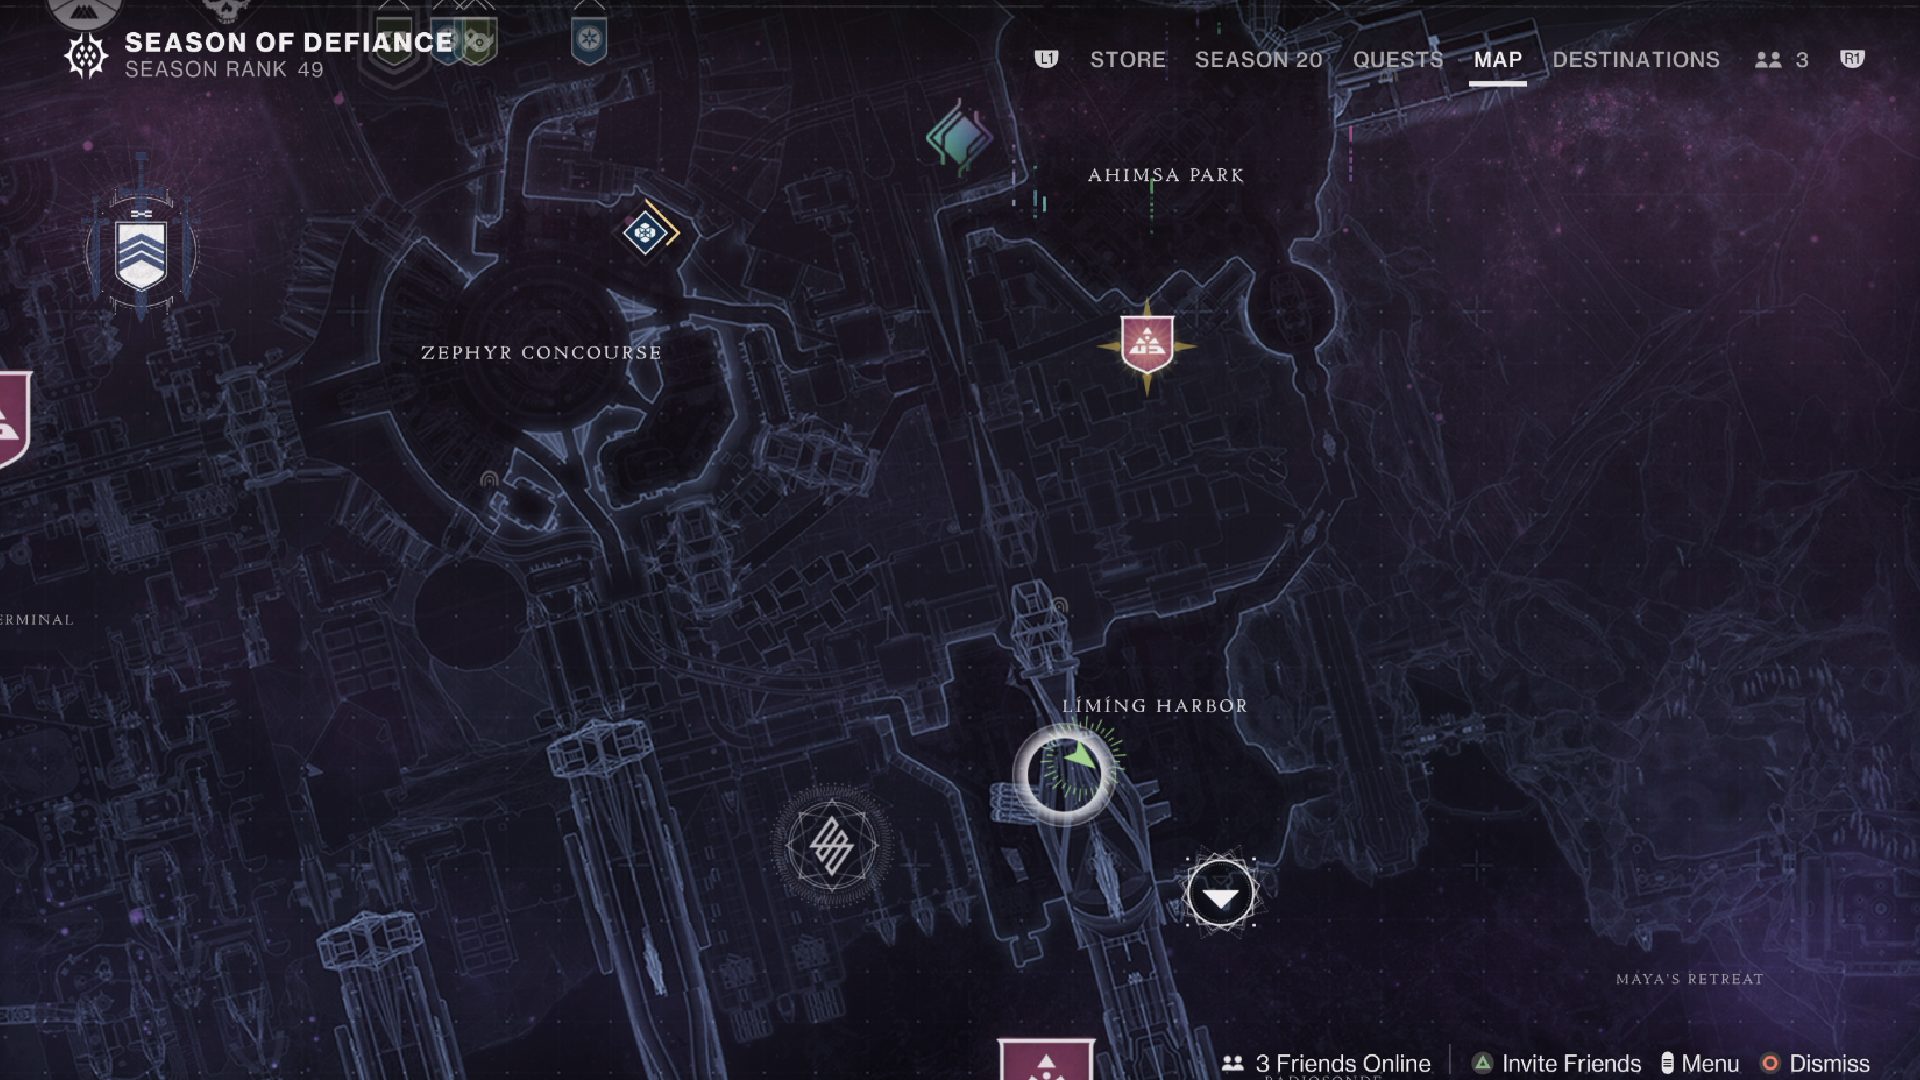 Destiny 2 Action Figures Locations: A map can be seen